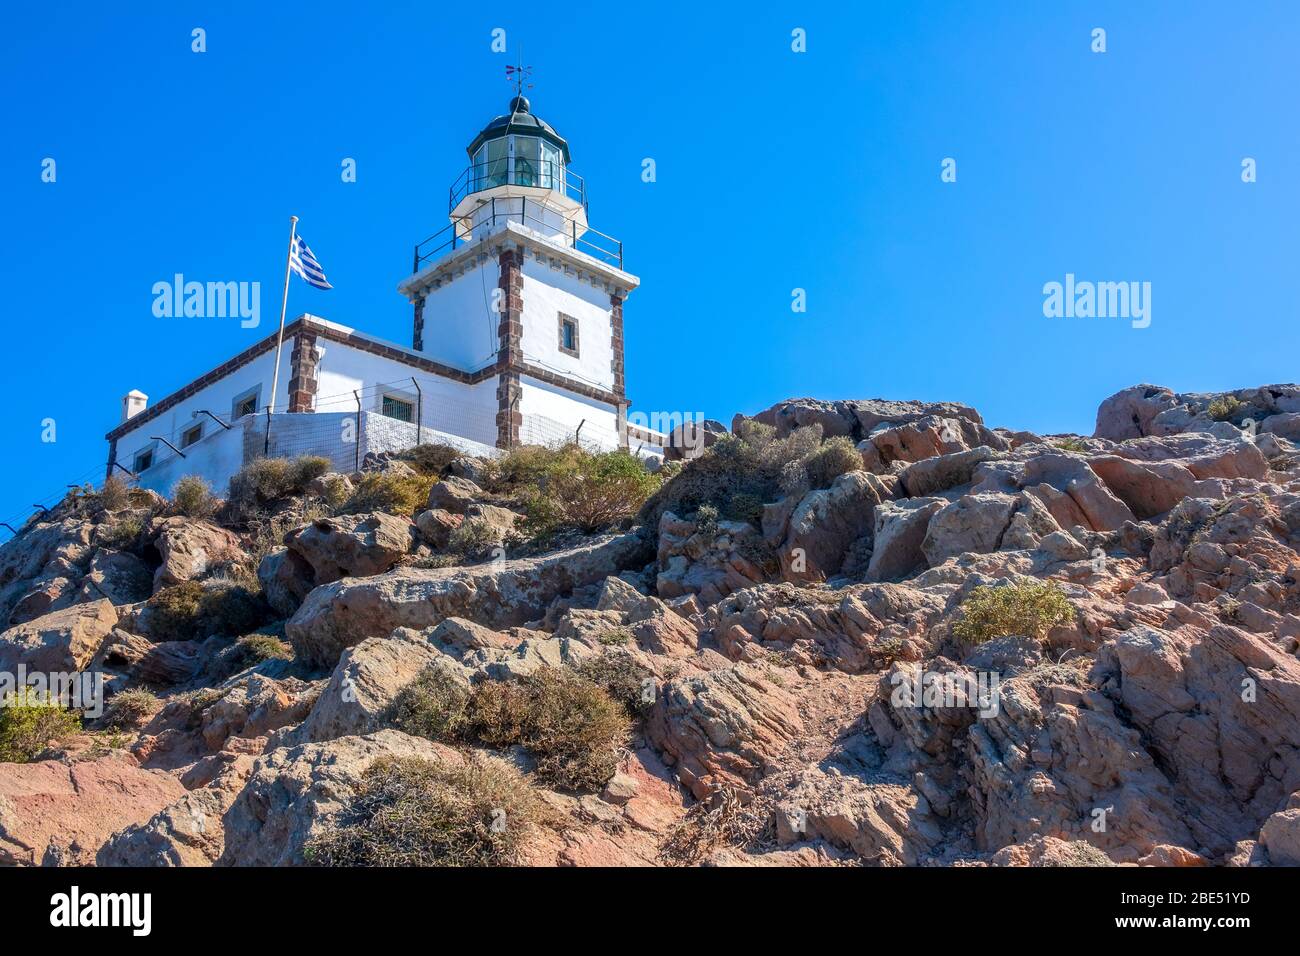 Greece. Rocky mountain on a sunny day. Lighthouse building and national flag against the blue sky Stock Photo